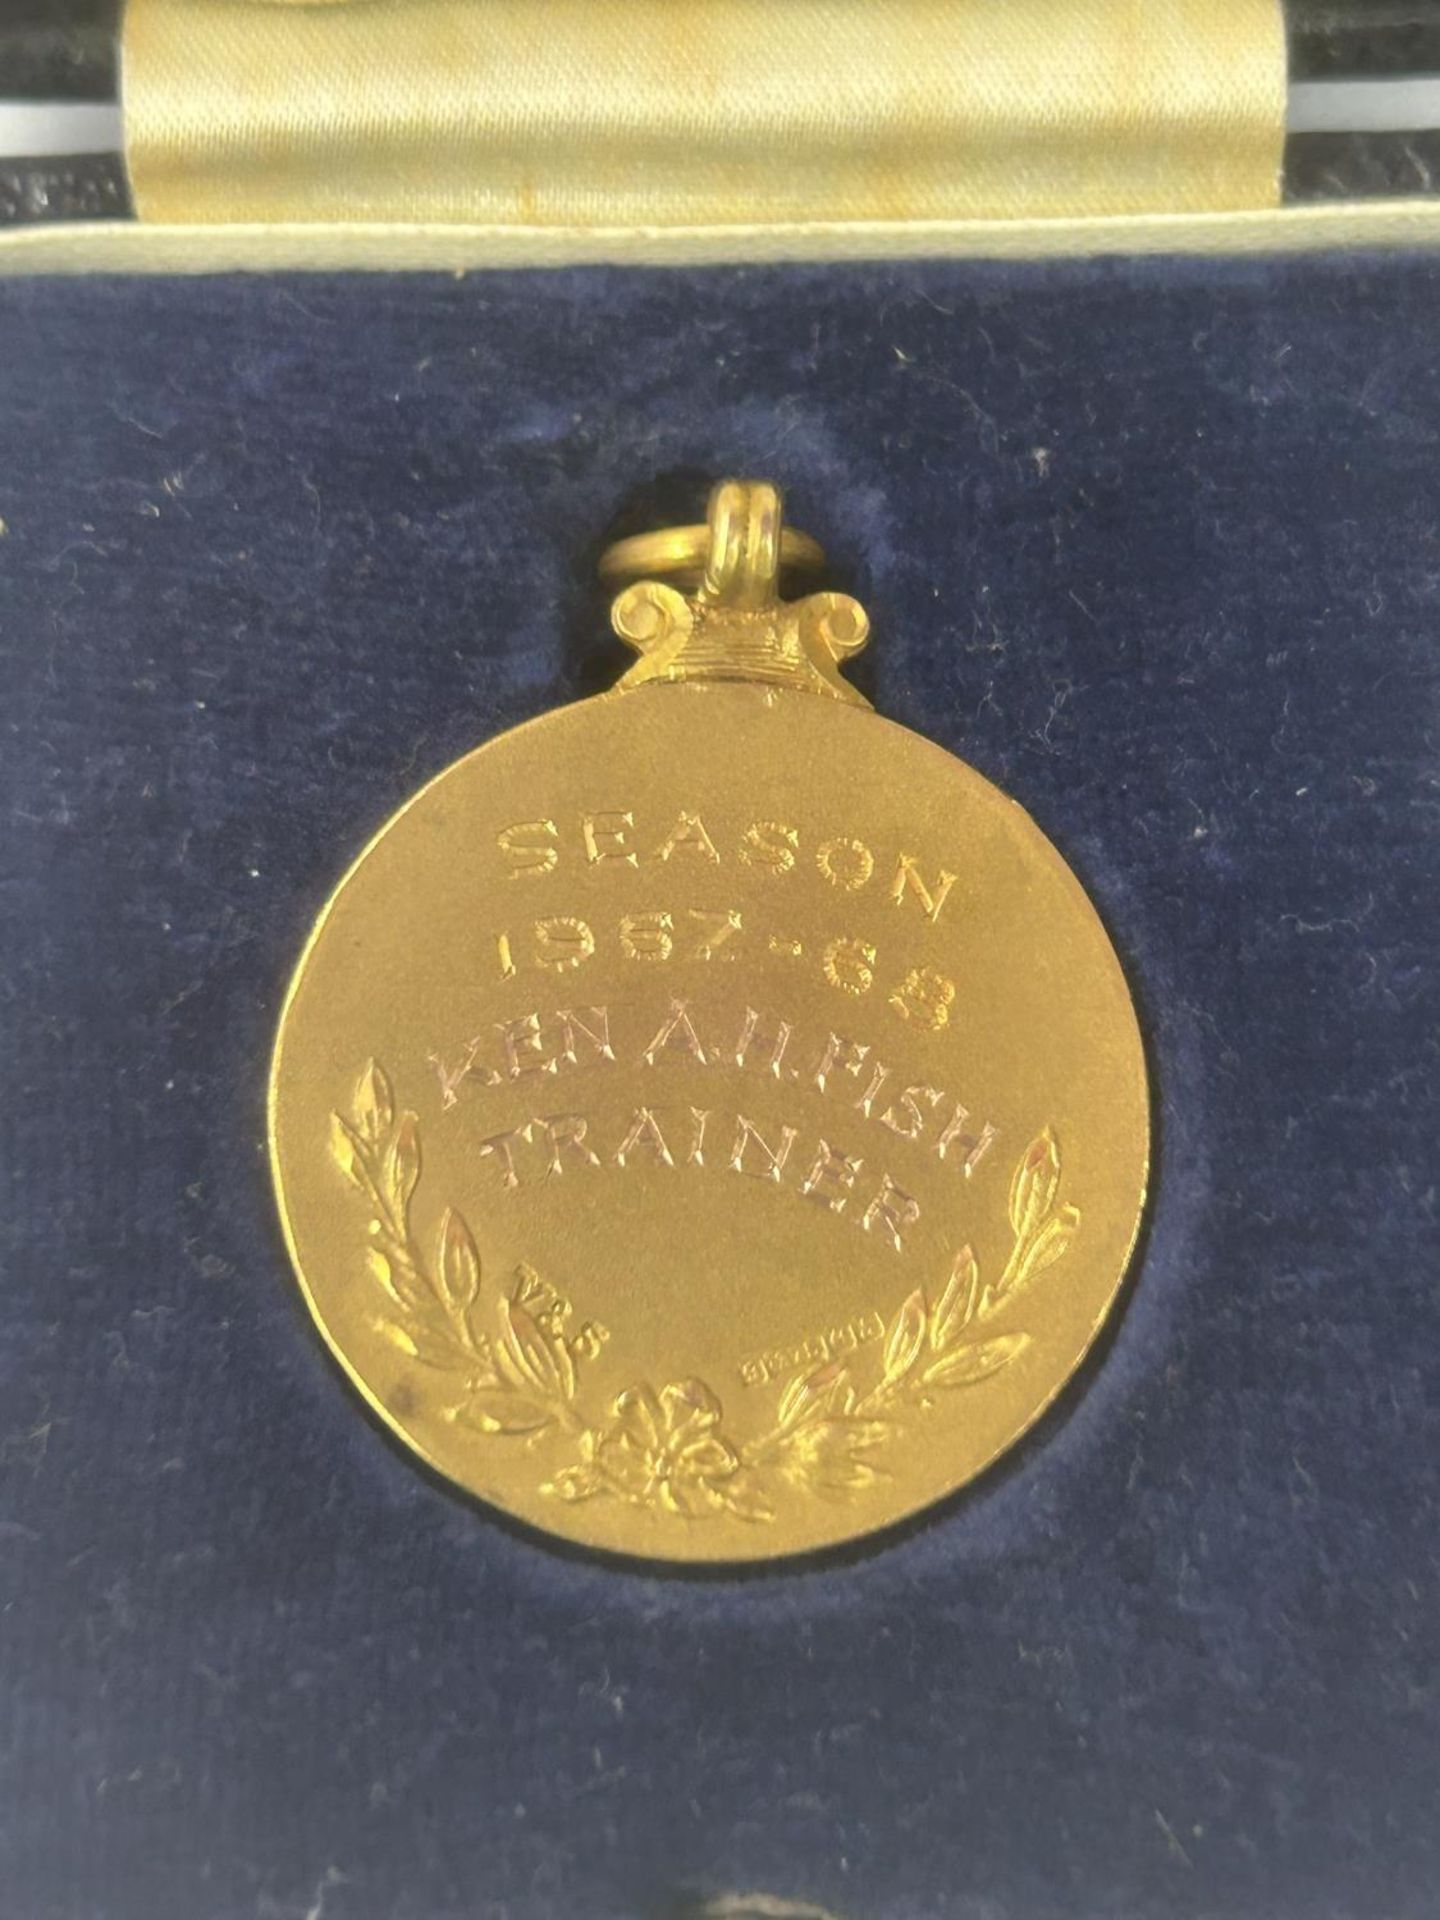 A HALLMARKED 9 CARAT GOLD FOOTBALL LEAGUE DIVISION 3 LEAGUE WINNERS MEDAL 1967-1968 SEASON, BY - Image 3 of 5